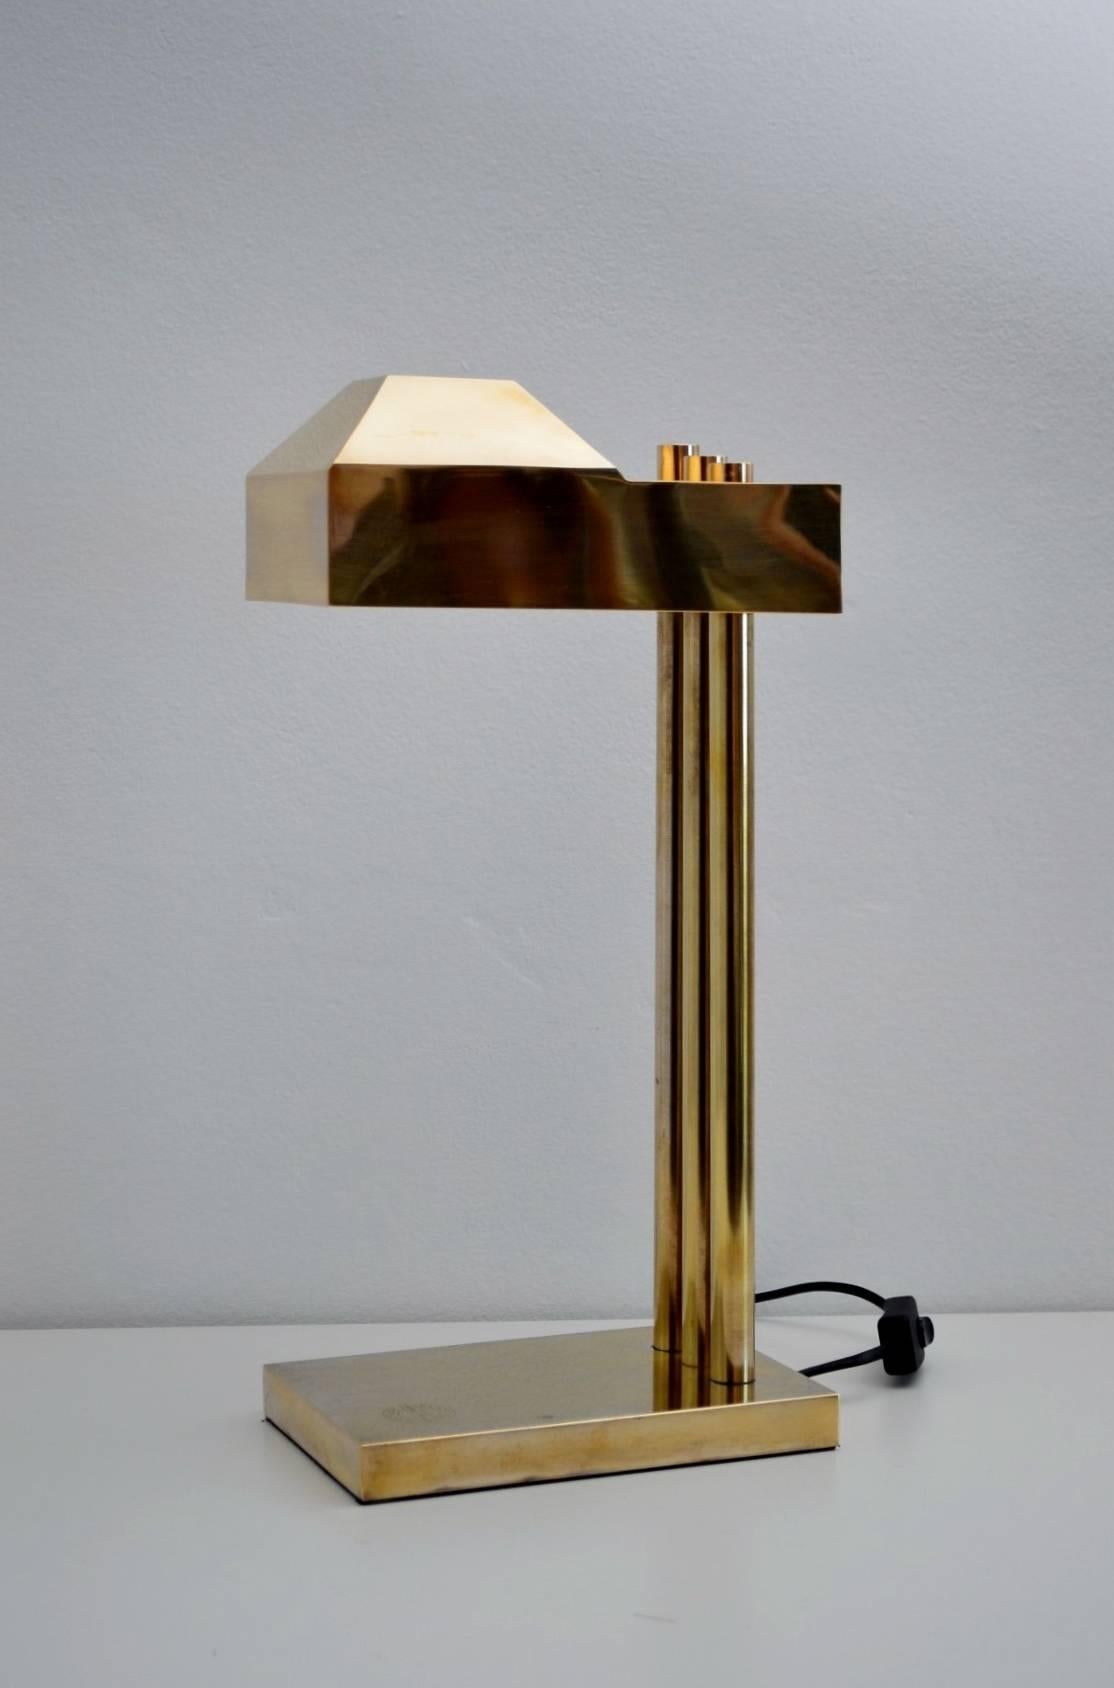 French Bauhaus Brass Desk or Table Lamp by Marcel Breuer, 1925, Marked